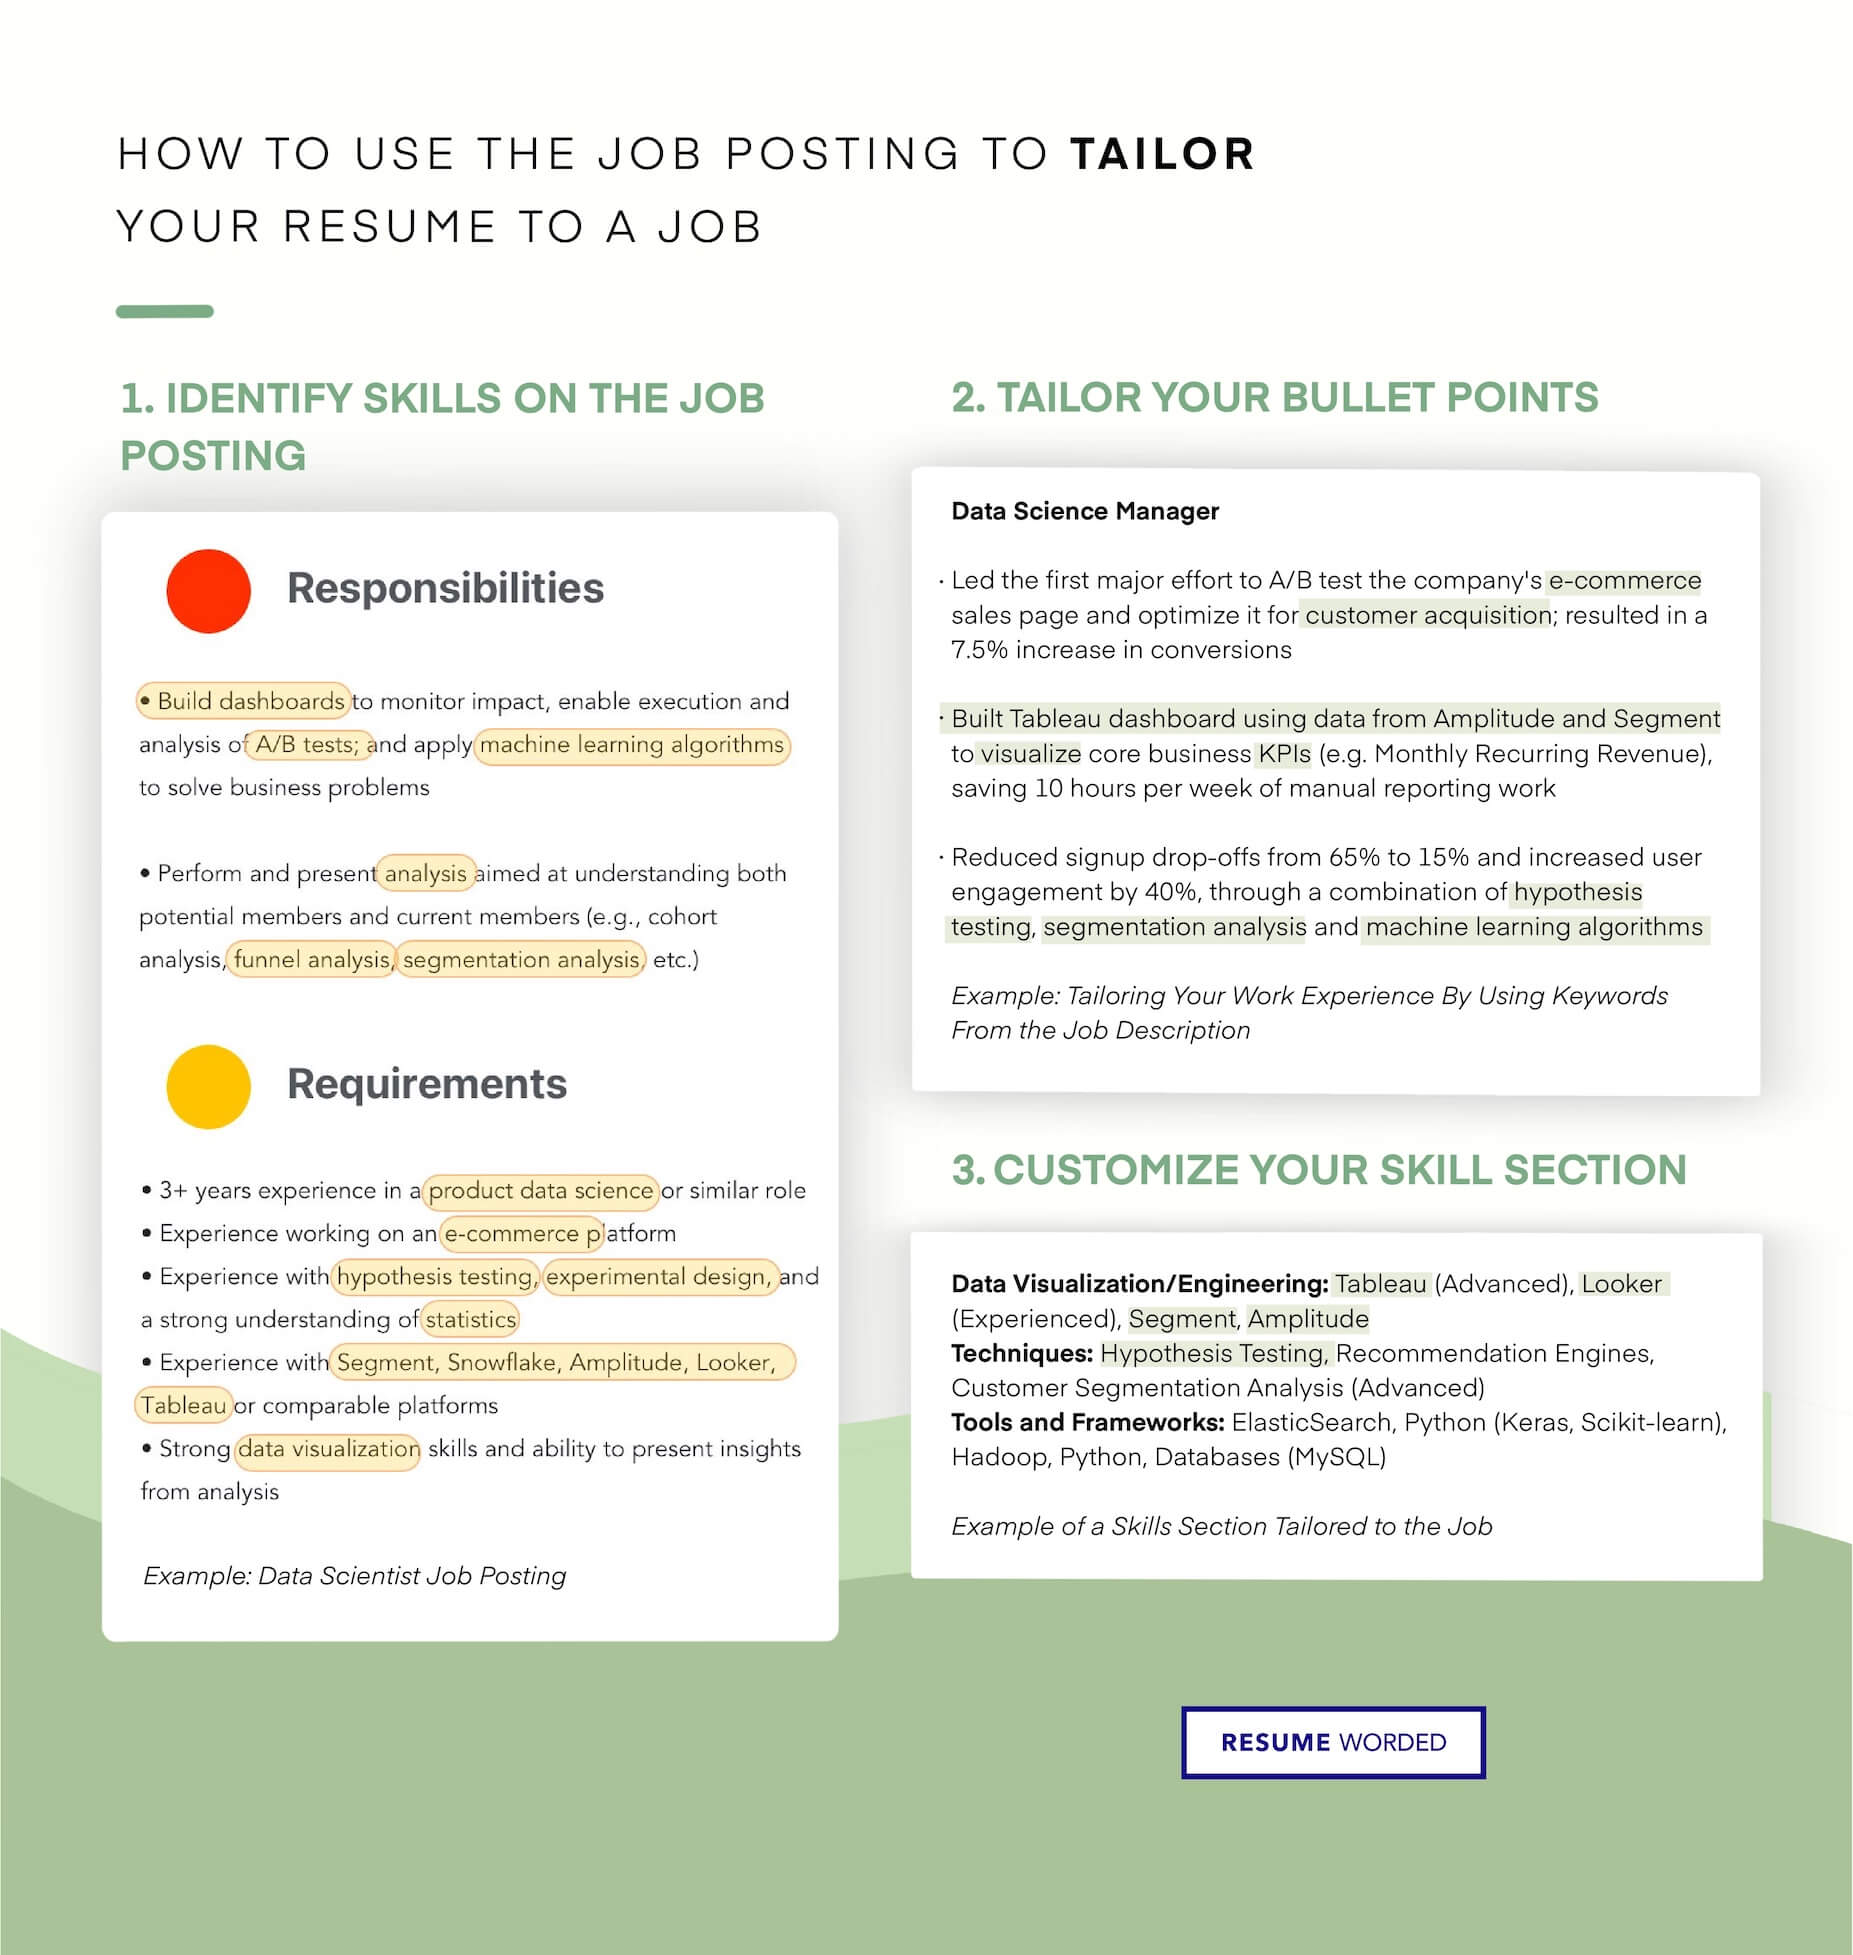 Craft your resume based on your specialty. - Marketing Manager Resume